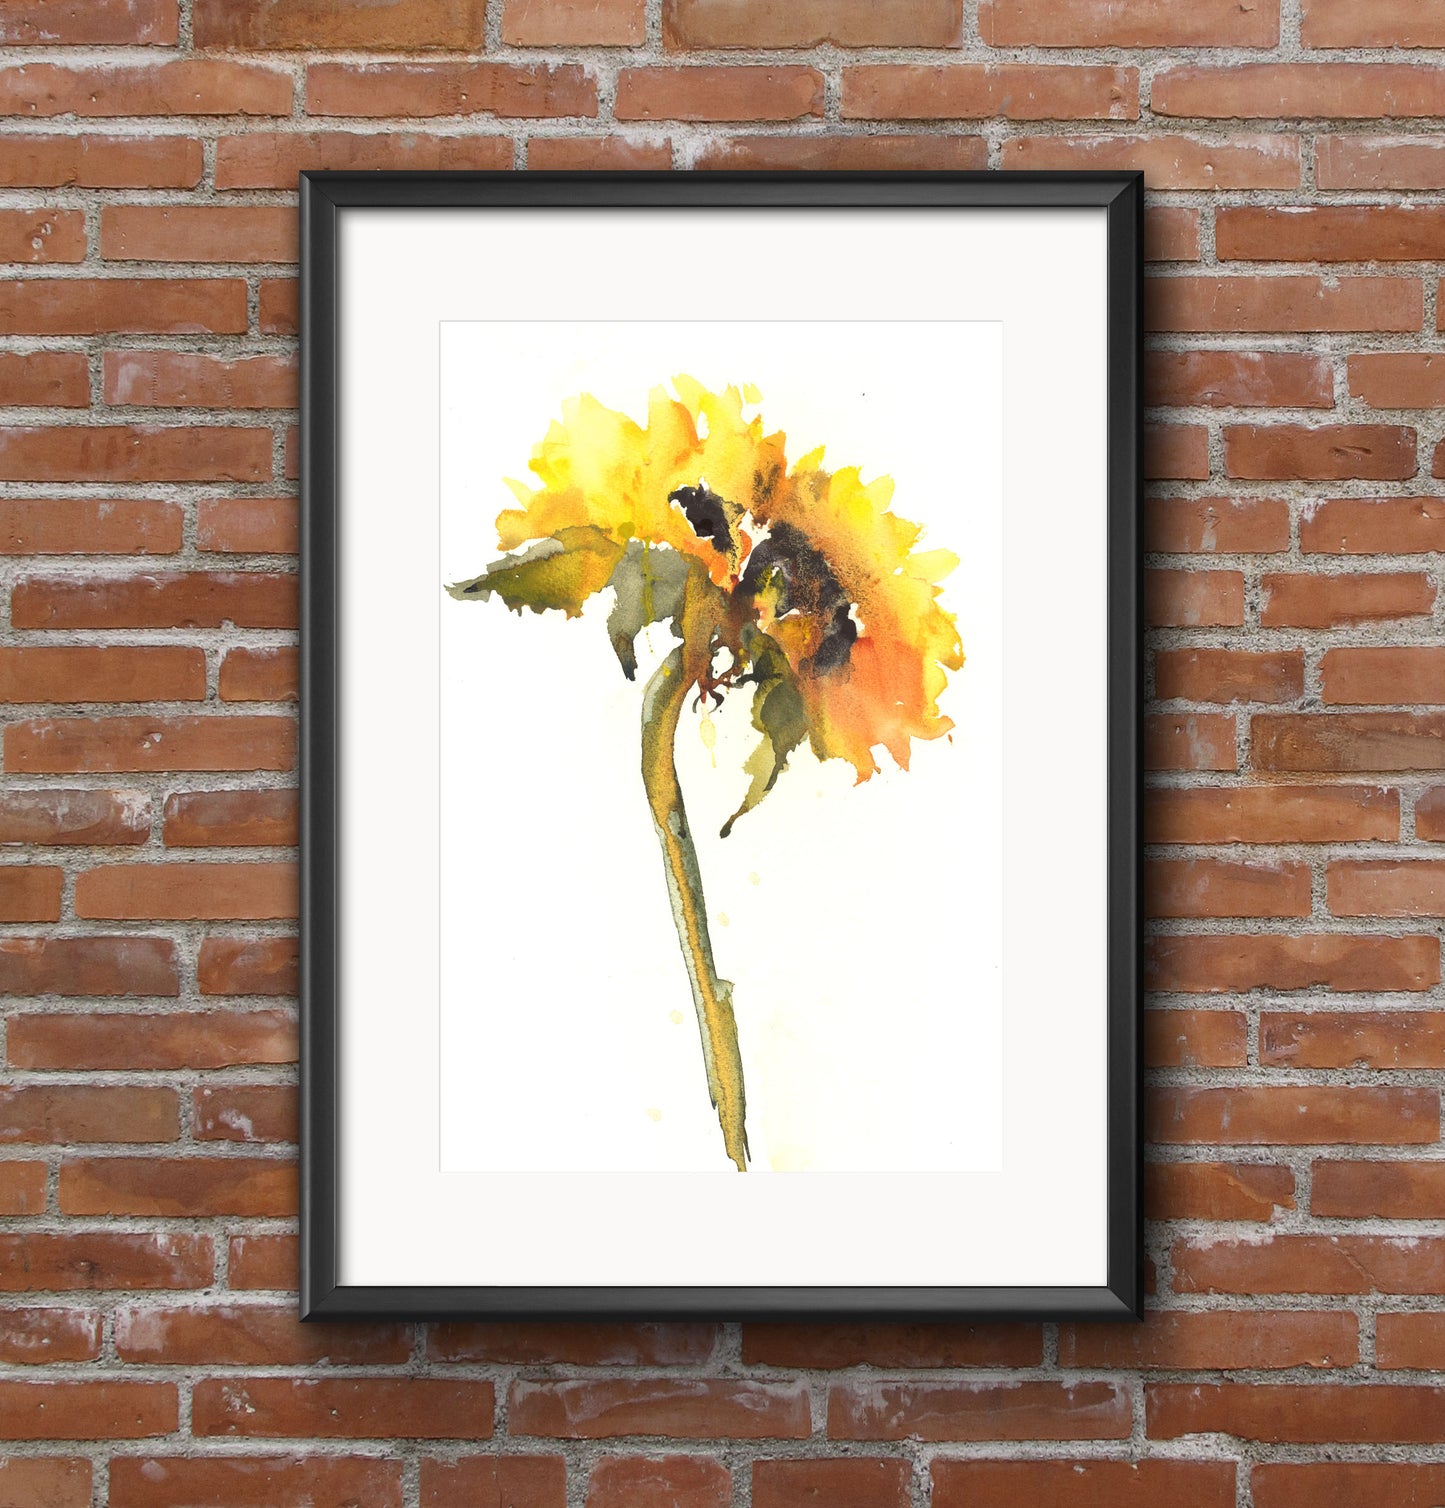 Limited edition print "Sunflower"